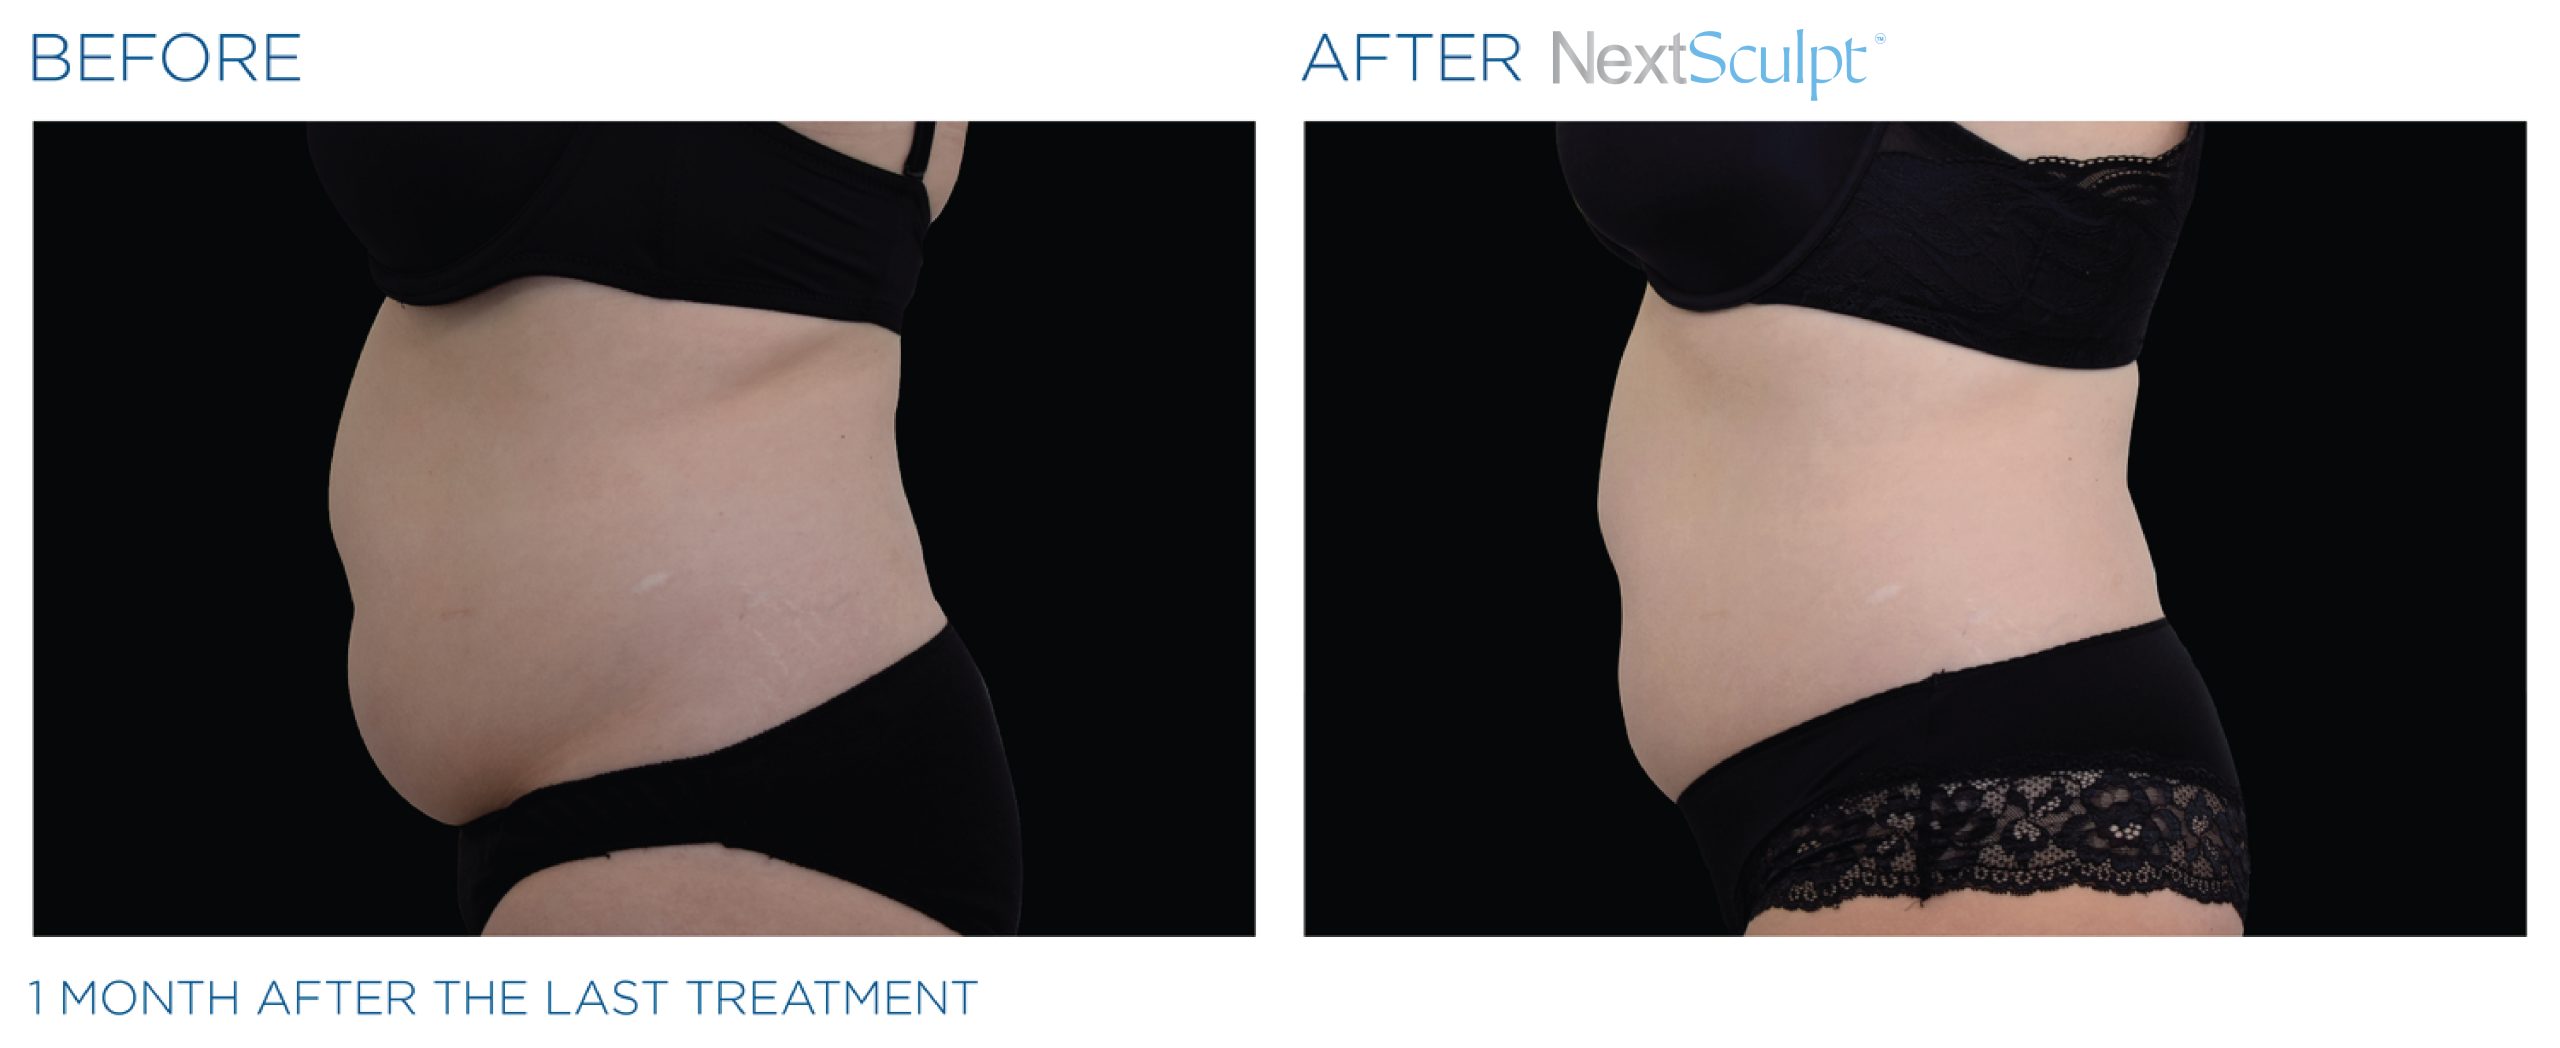 nextsculpt-before-after-03-scaled.jpg